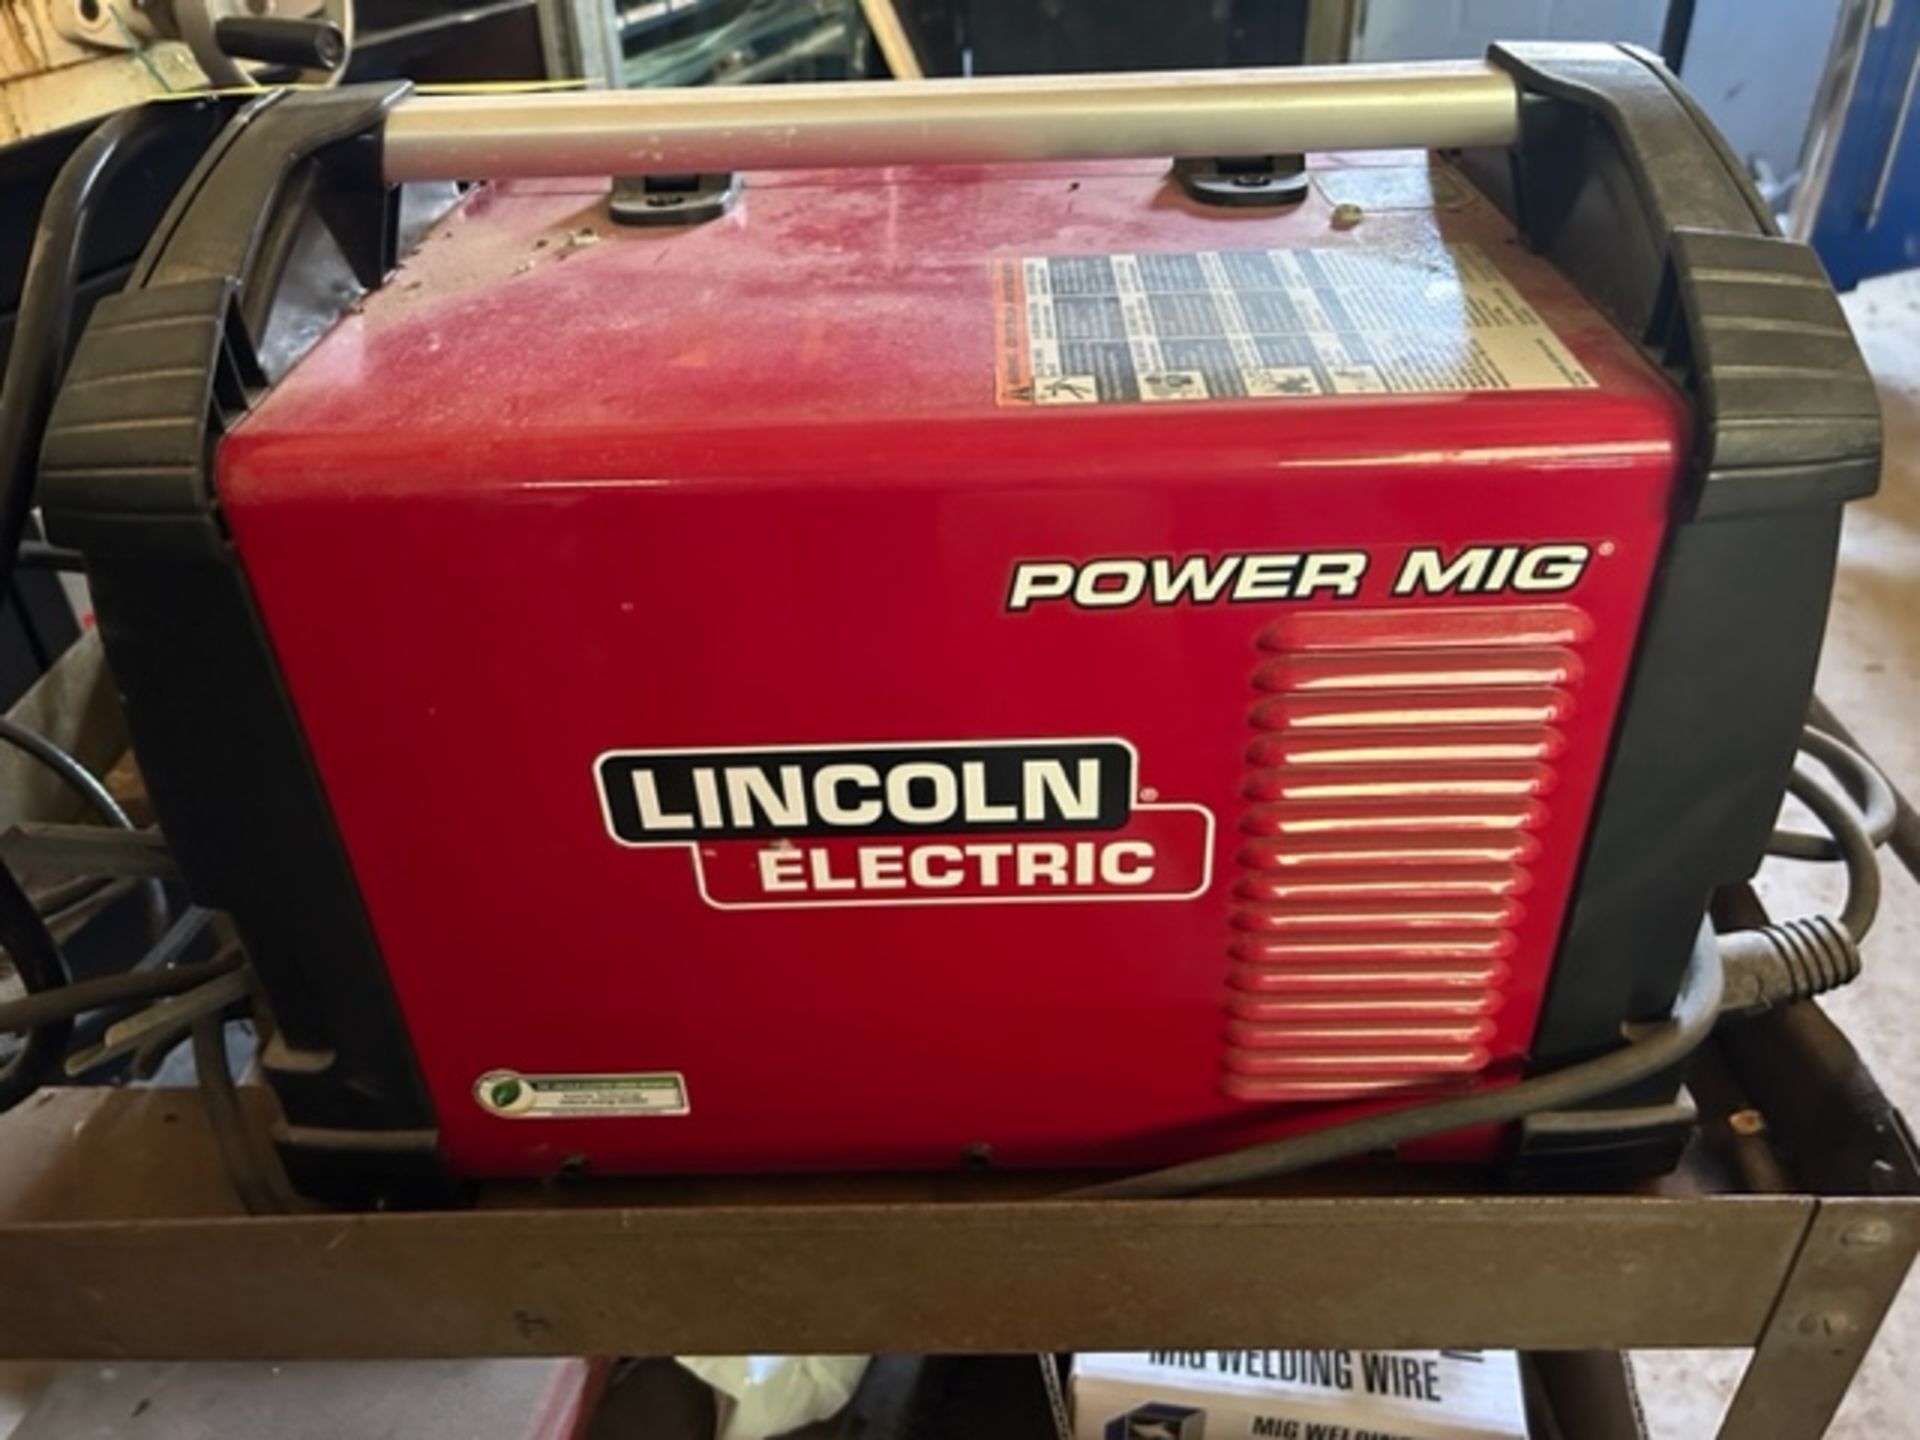 Lincoln Electric Power Mig 210MP Welder - Image 2 of 3